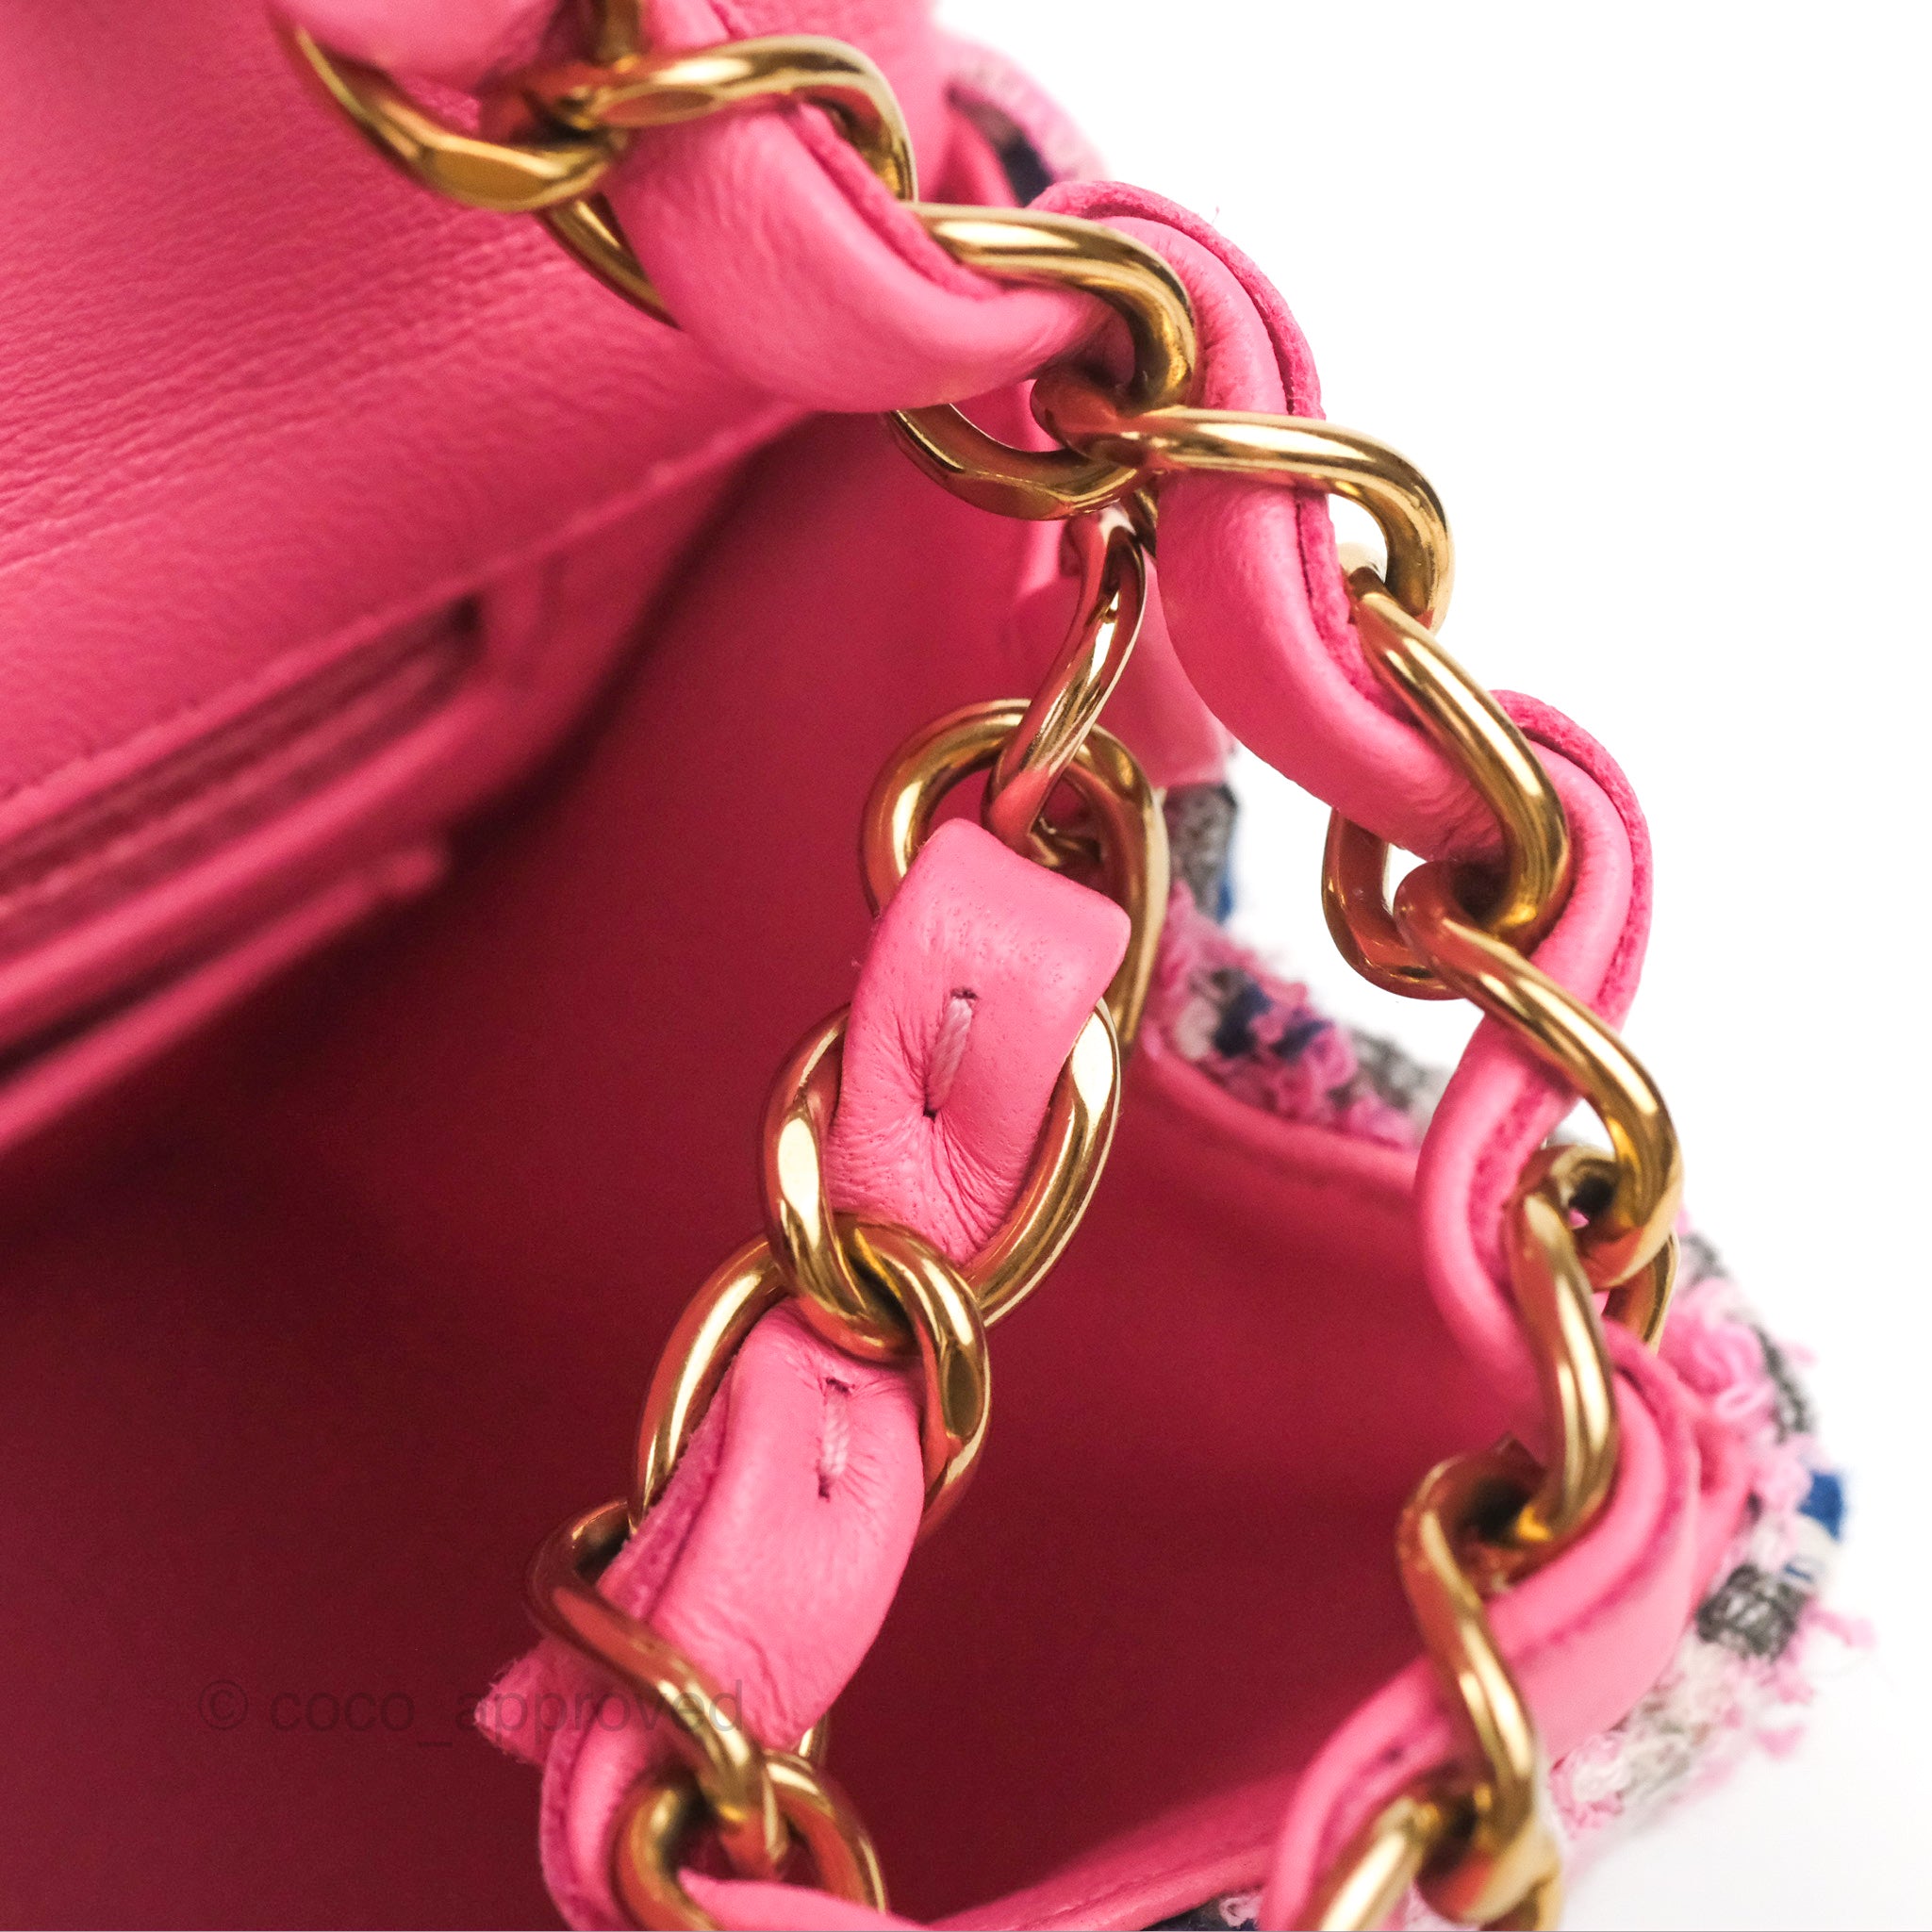 Chanel Tweed Flap Bag, Pink Tweed with Gold Hardware, New in Box WA001